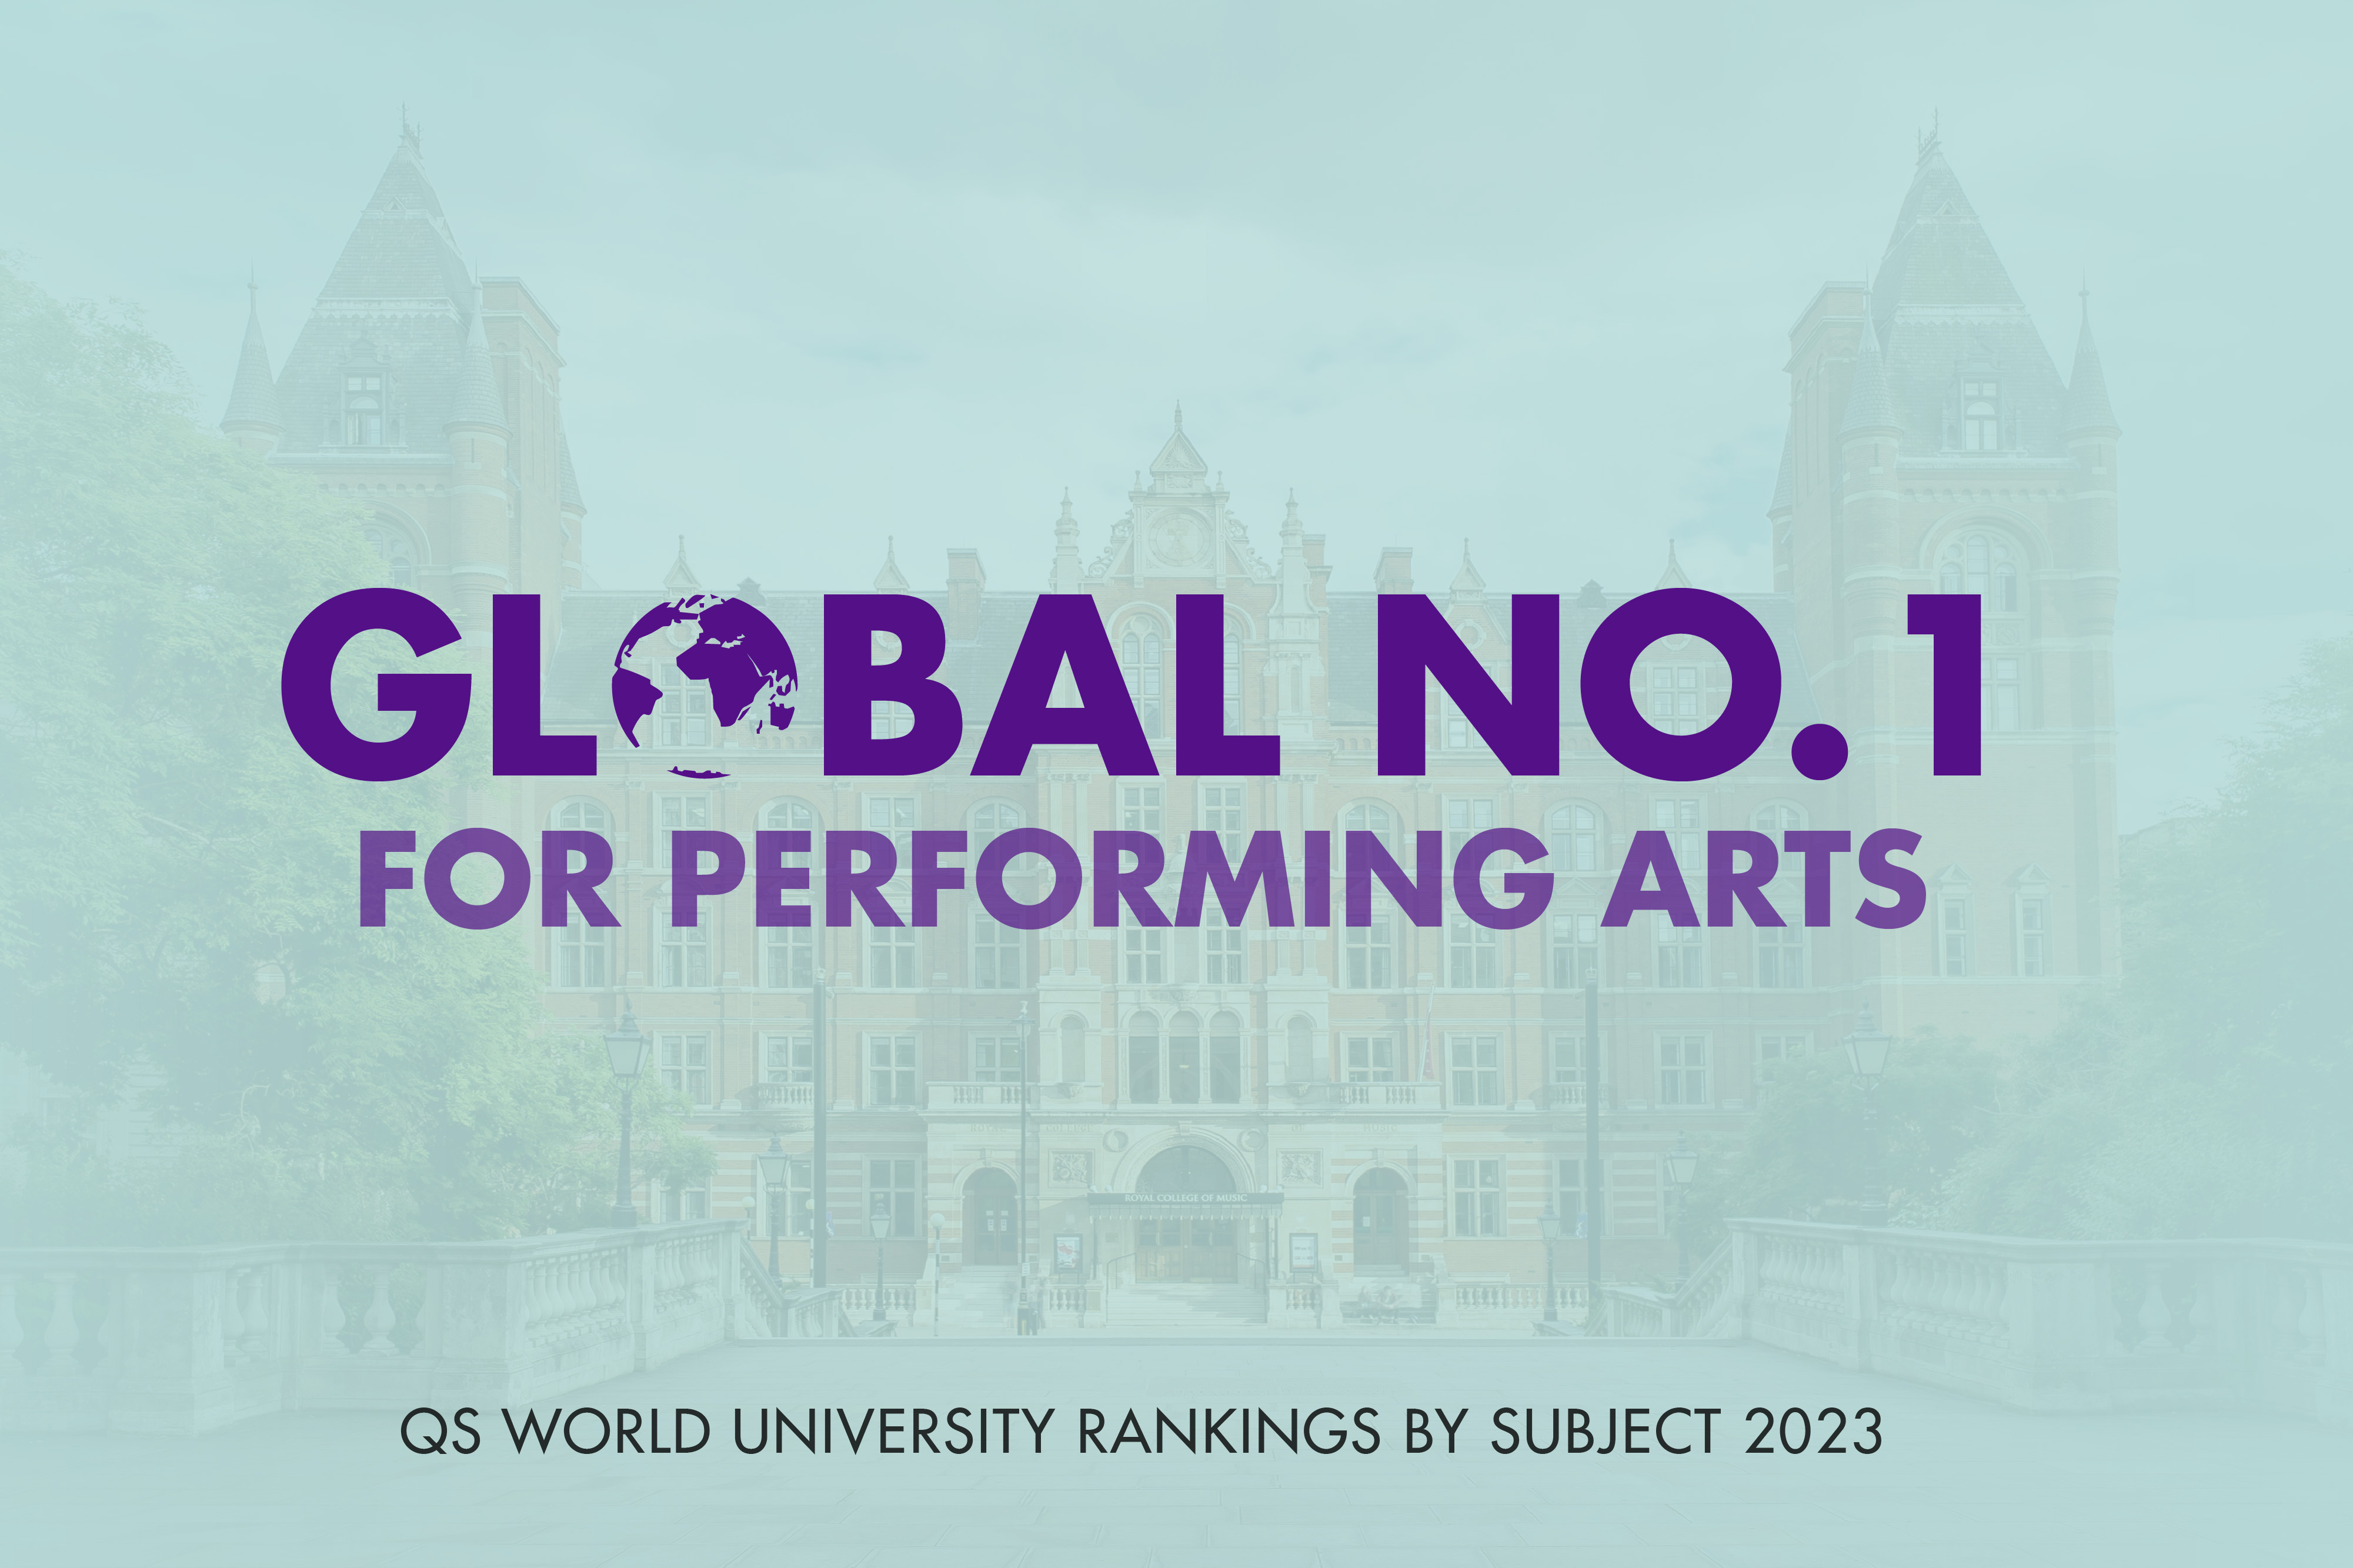 image for news story: Royal College of Music ranked global No. 1 for performing arts 2023